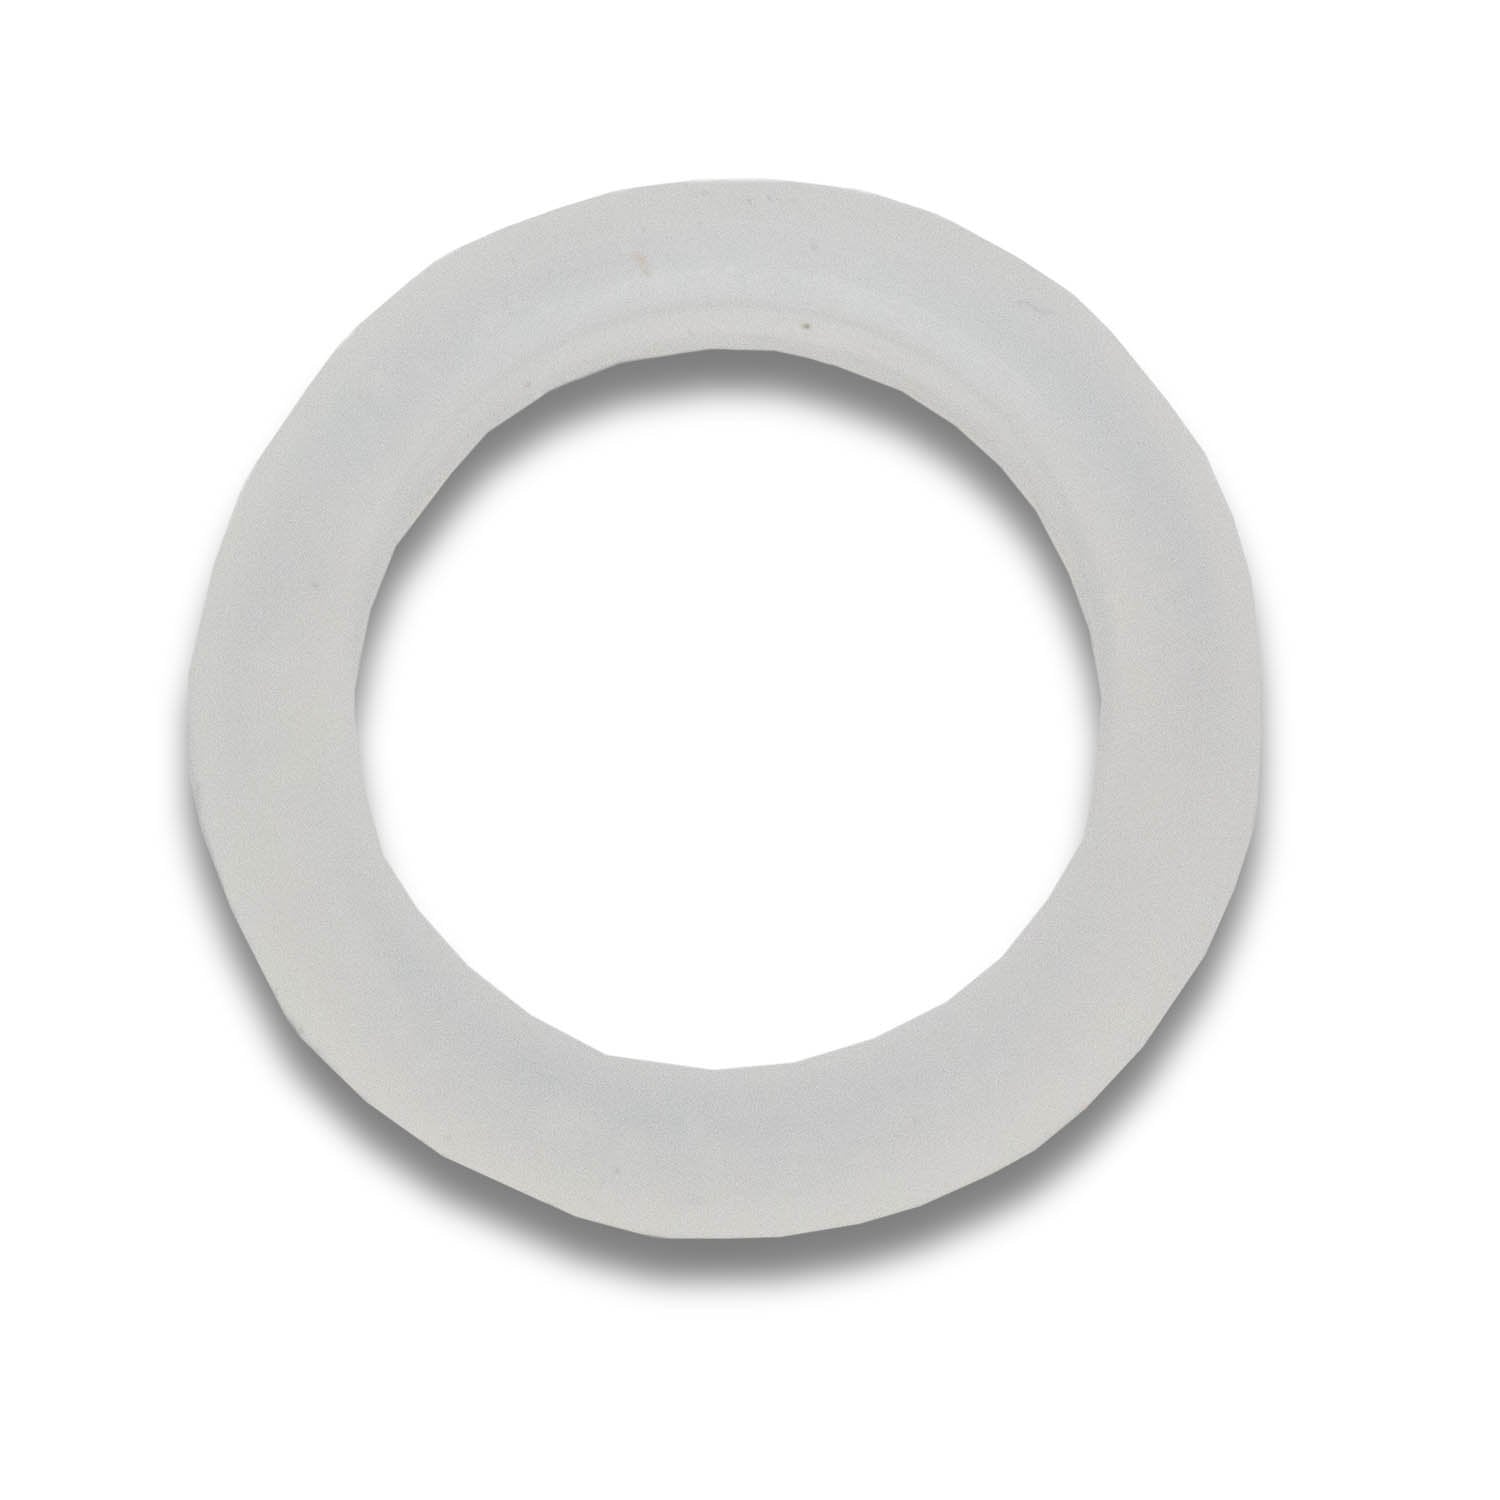 6 GPM UV O-Ring (set of 2) - Parts - Crystal Quest Water Filters